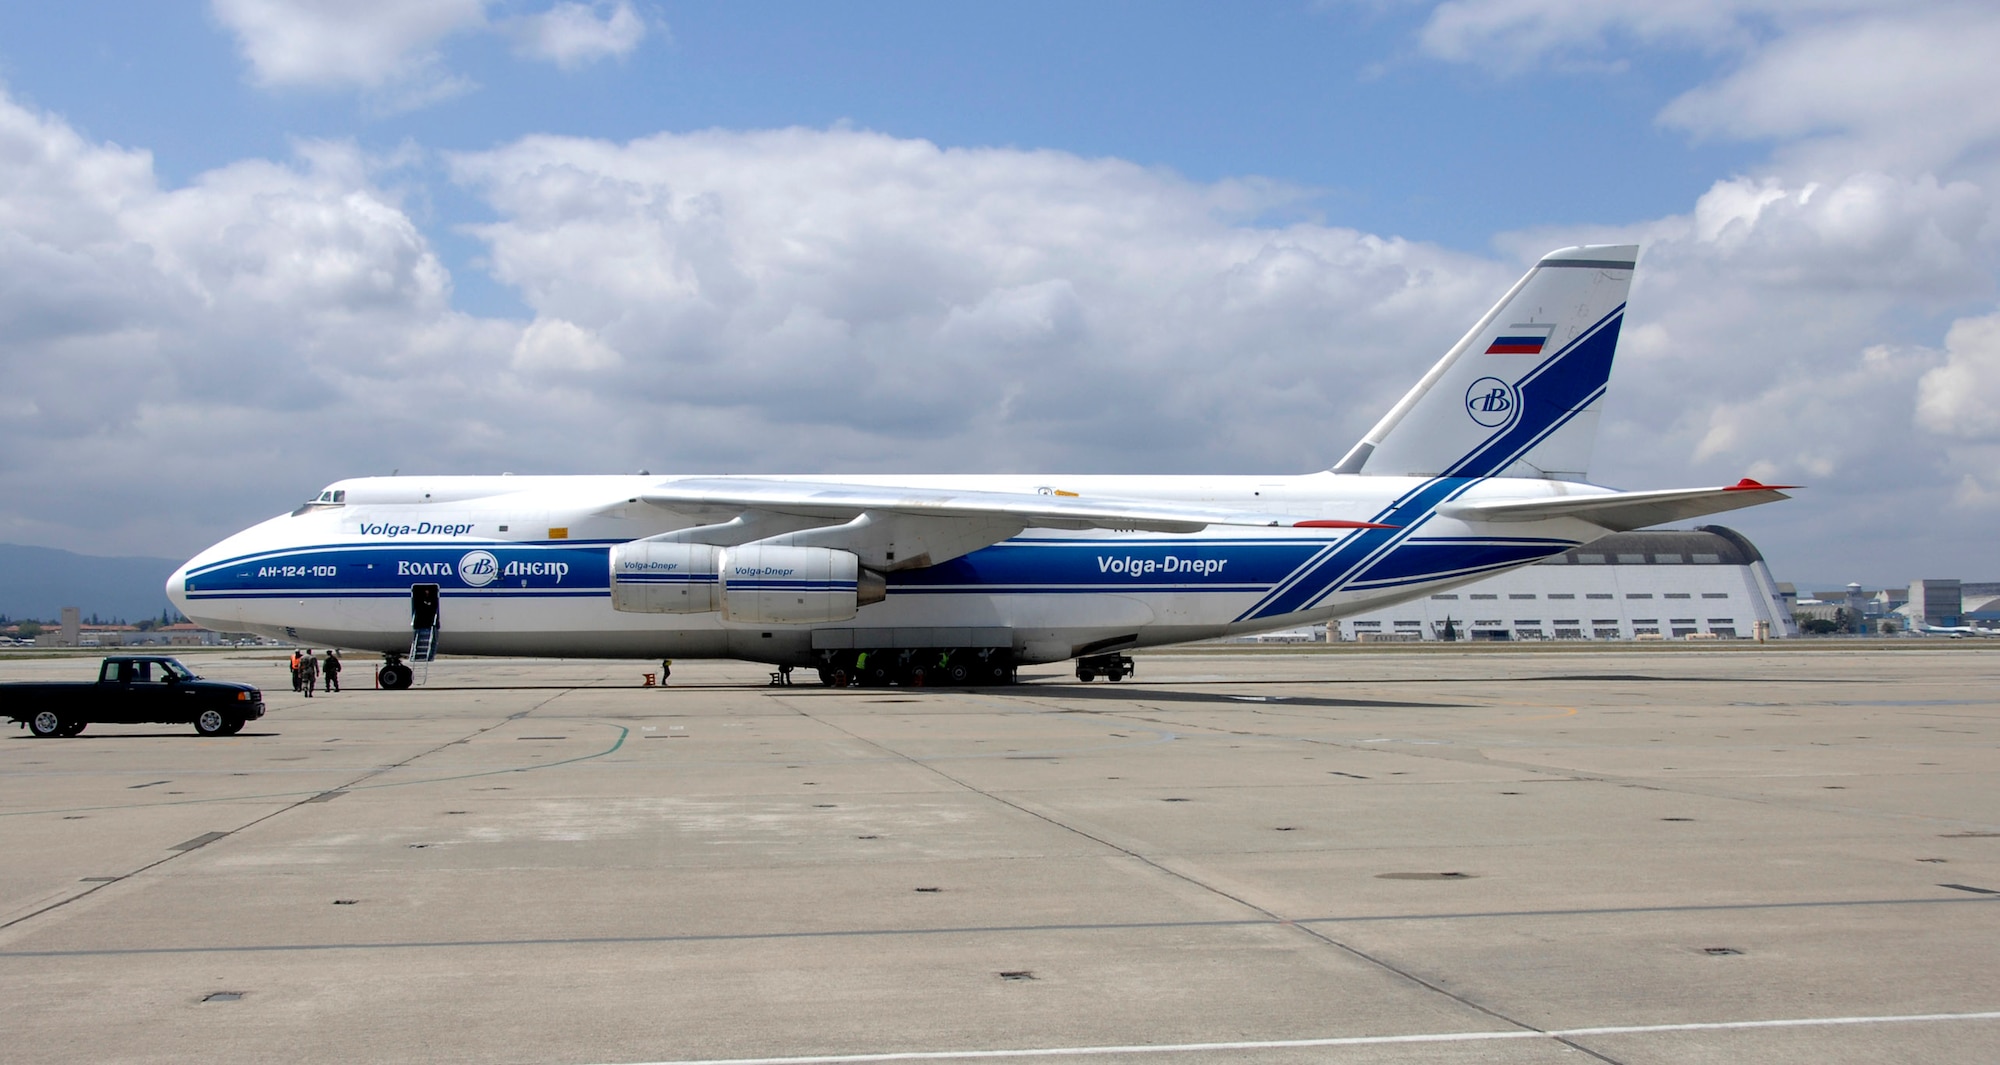 A Russian Volga-Dnepr AN-124 long-range heavy transport aircraft is parked April 20 at Moffett Federal Airfield, Calif. The contracted AN-124 transported 129th Rescue Wing deployment cargo to Afghanistan because the high operations tempos of Operations Iraqi Freedom and Enduring Freedom have kept C-17 Globemaster III and C-5 Galaxy aircraft fully engaged. (U.S. Air Force photo/Senior Master Sgt. Christopher Hartman)